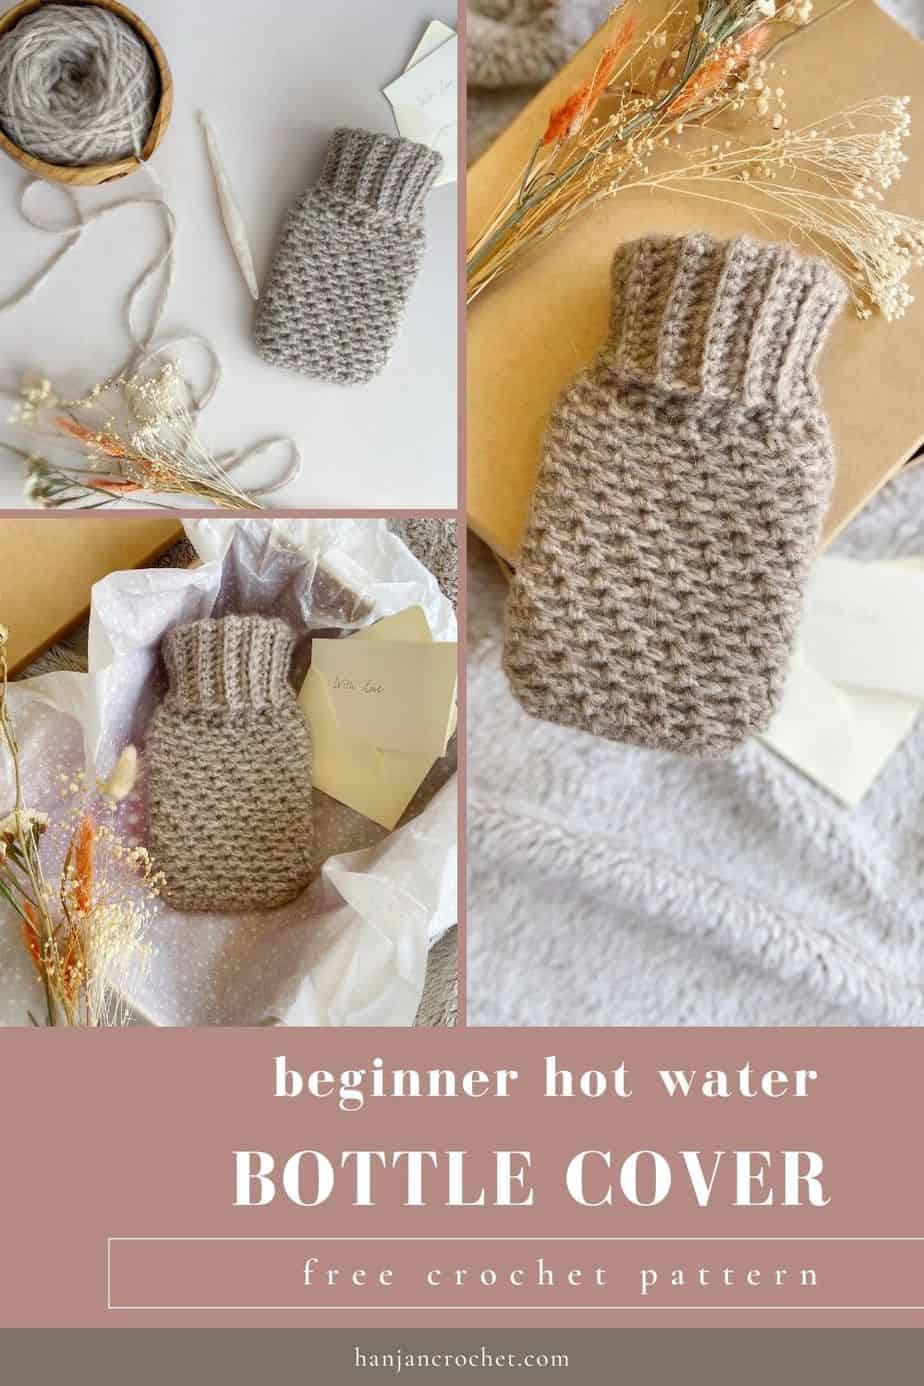 Three images of hot water bottle crochet covers.